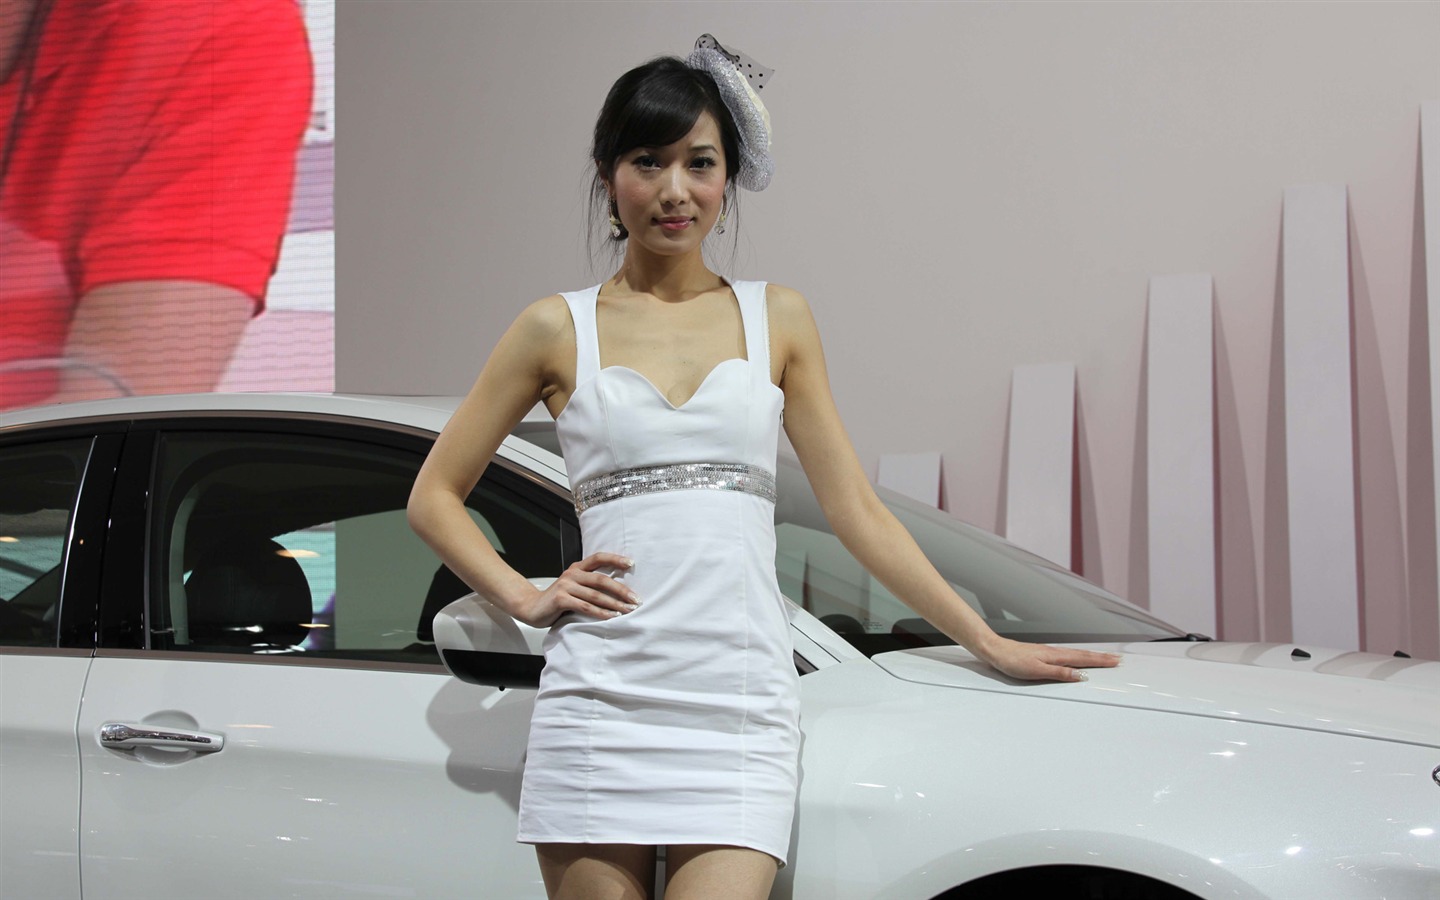 2010 Beijing International Auto Show beauty (2) (the wind chasing the clouds works) #33 - 1440x900